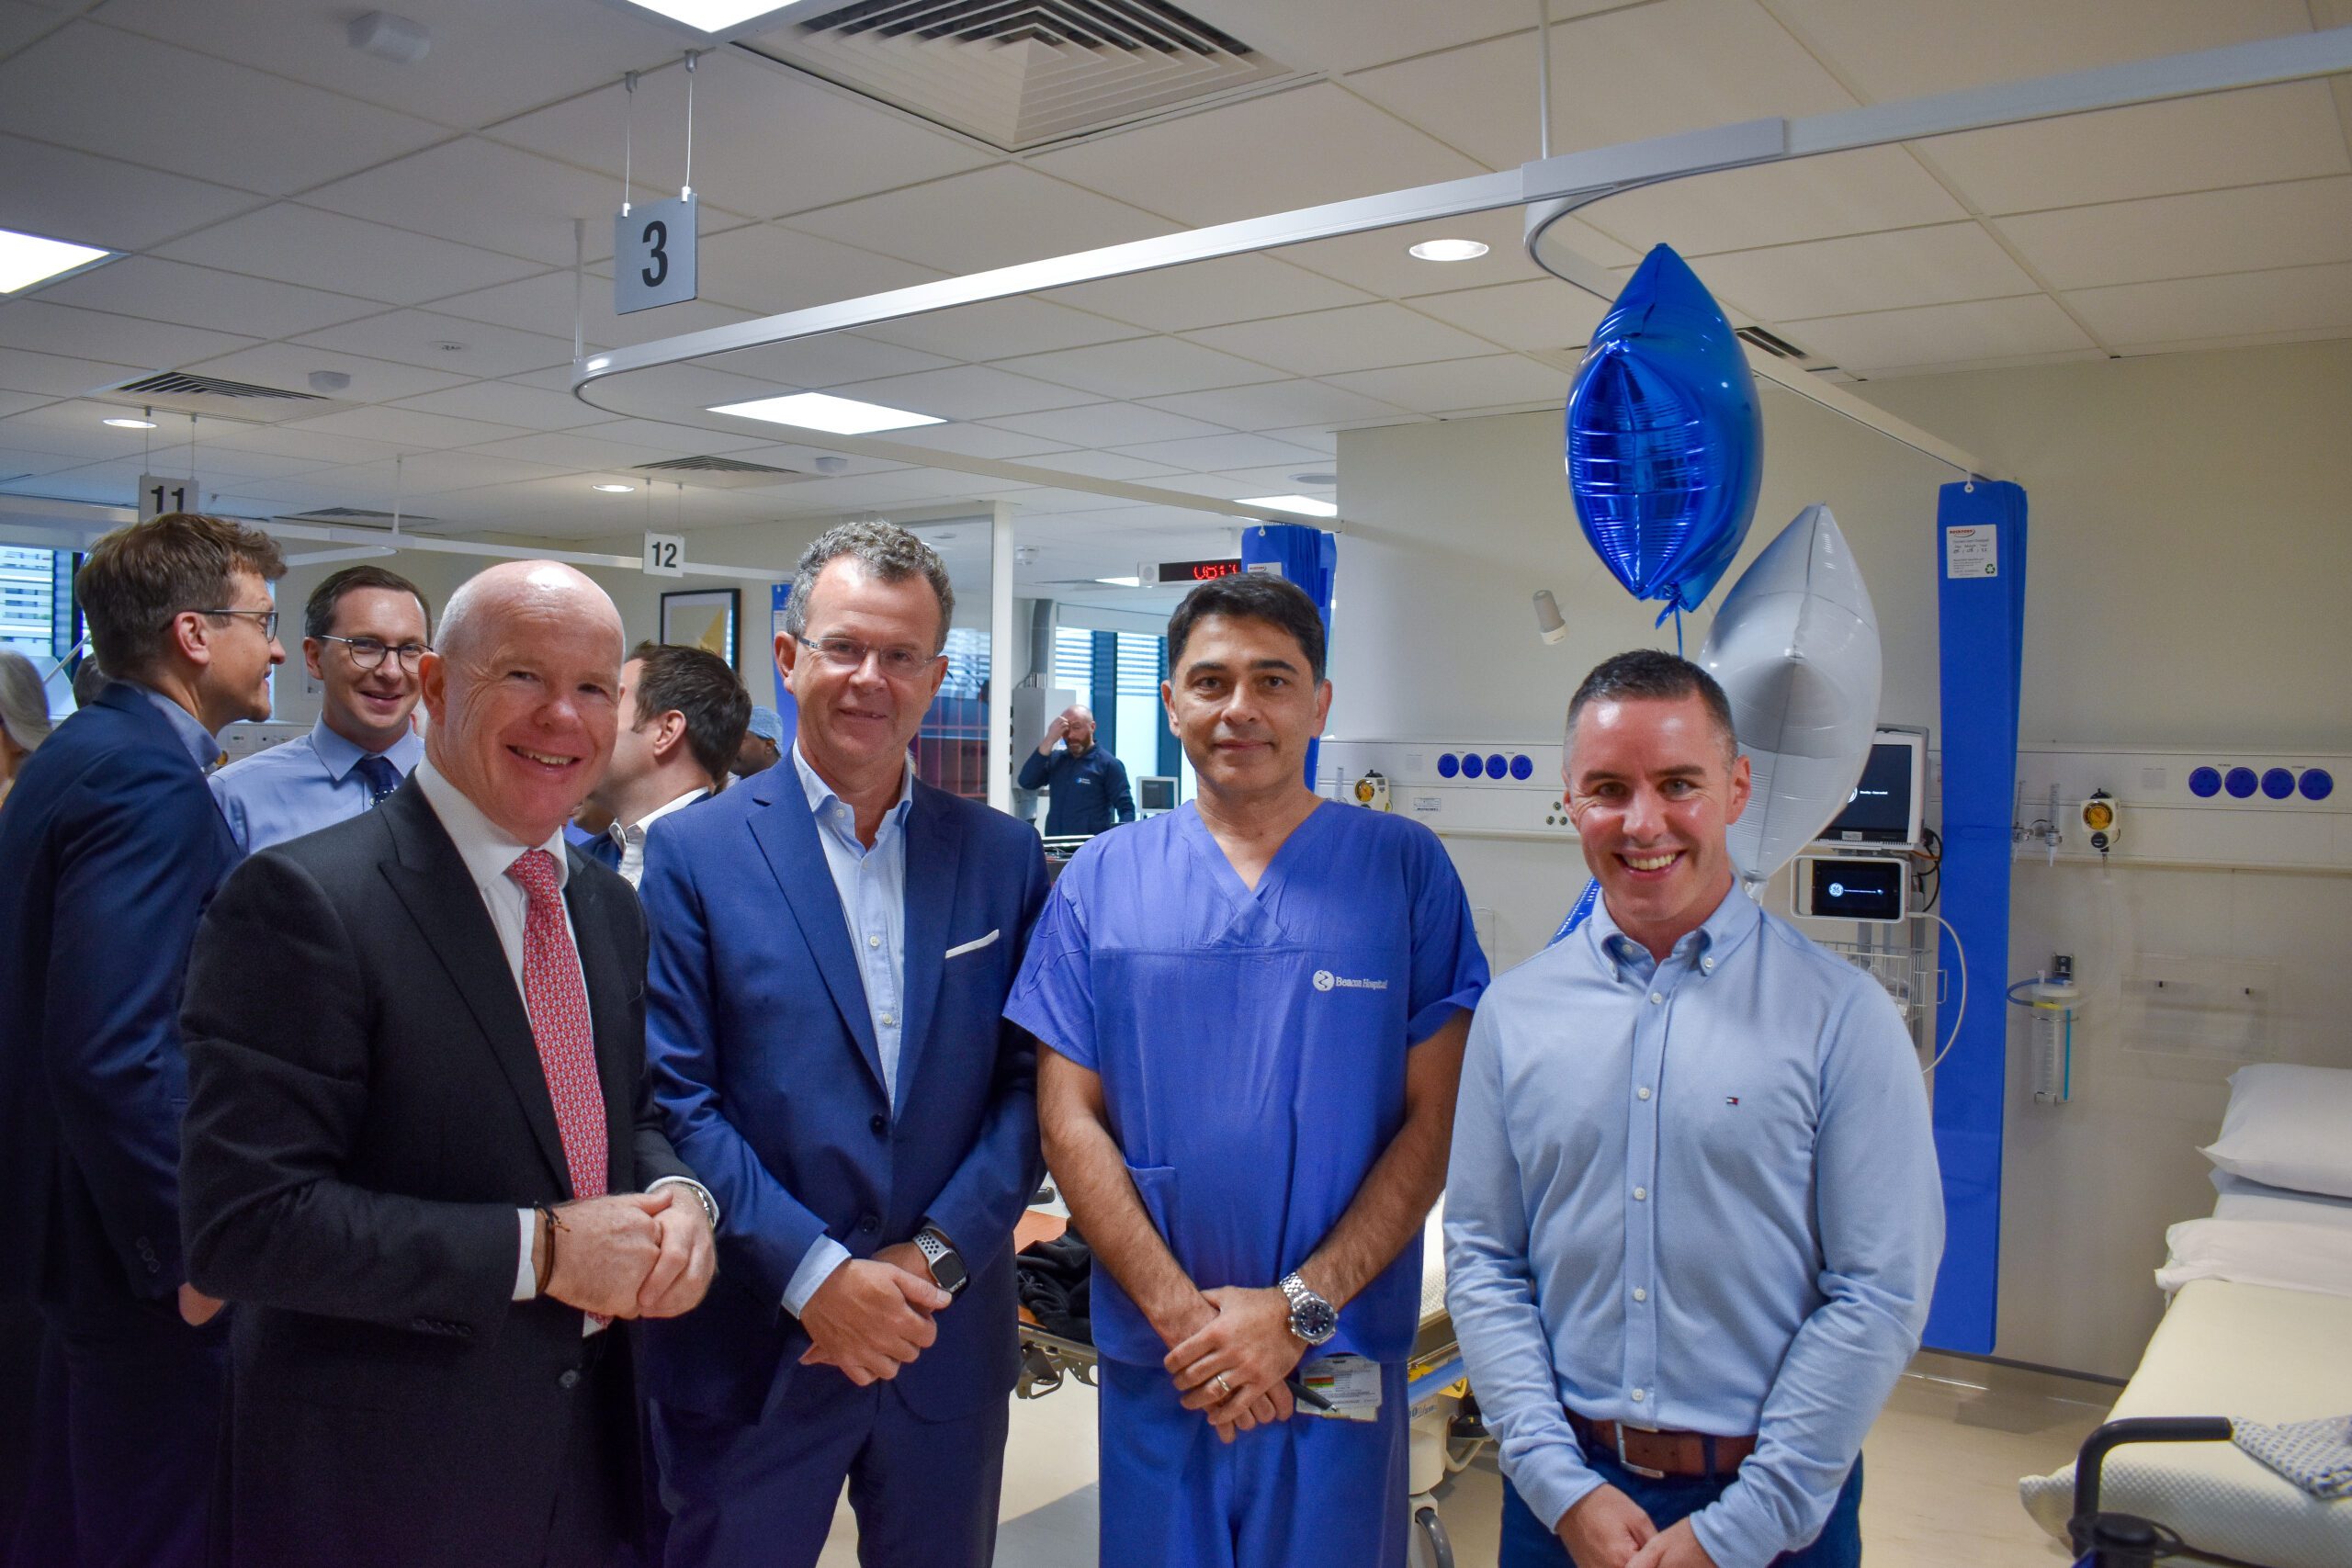 Our Cardiology Consultants at the Opening of our New Cath Lab Admissions and Recovery Area